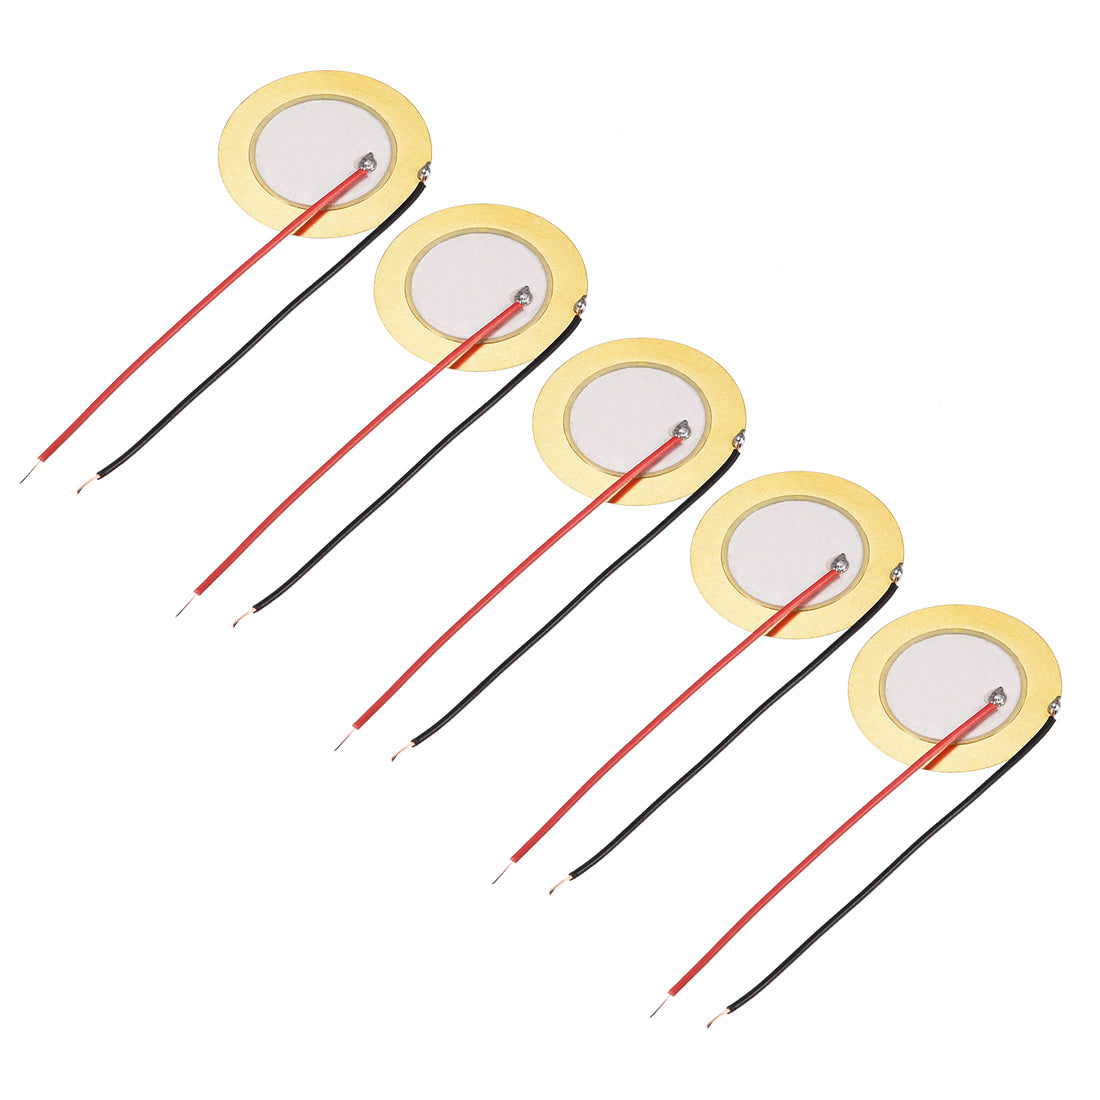 uxcell Uxcell 5Pcs Piezo Discs 27mm Acoustic Pickup Transducer Microphone Trigger Buzzer Drum Guitar